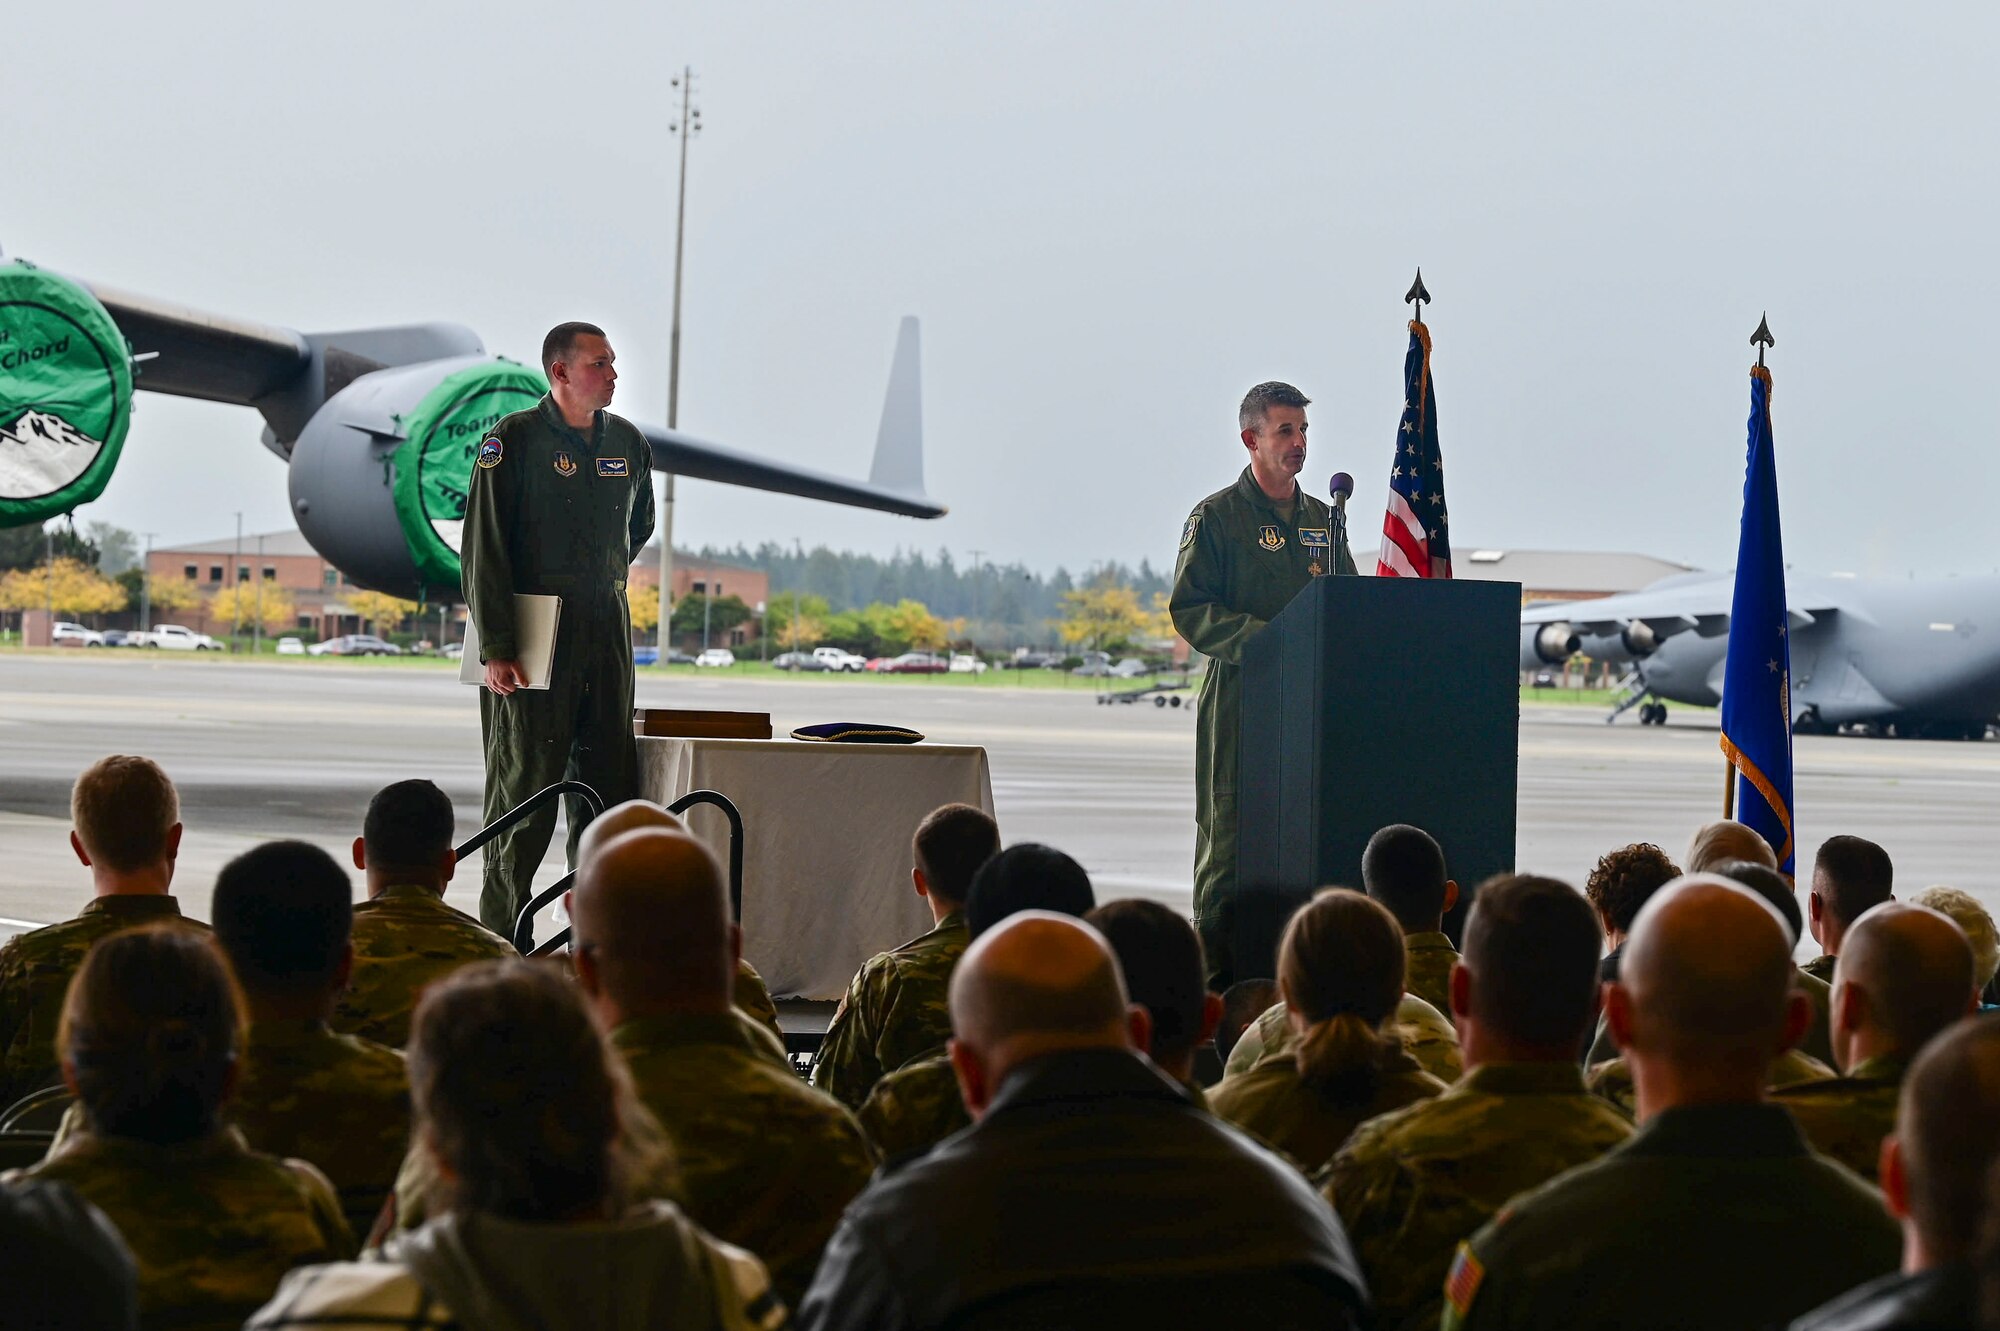 A man in a flight suit makes remarks at a podium on a stage in front of a C-17 Globemaster III to an audience.